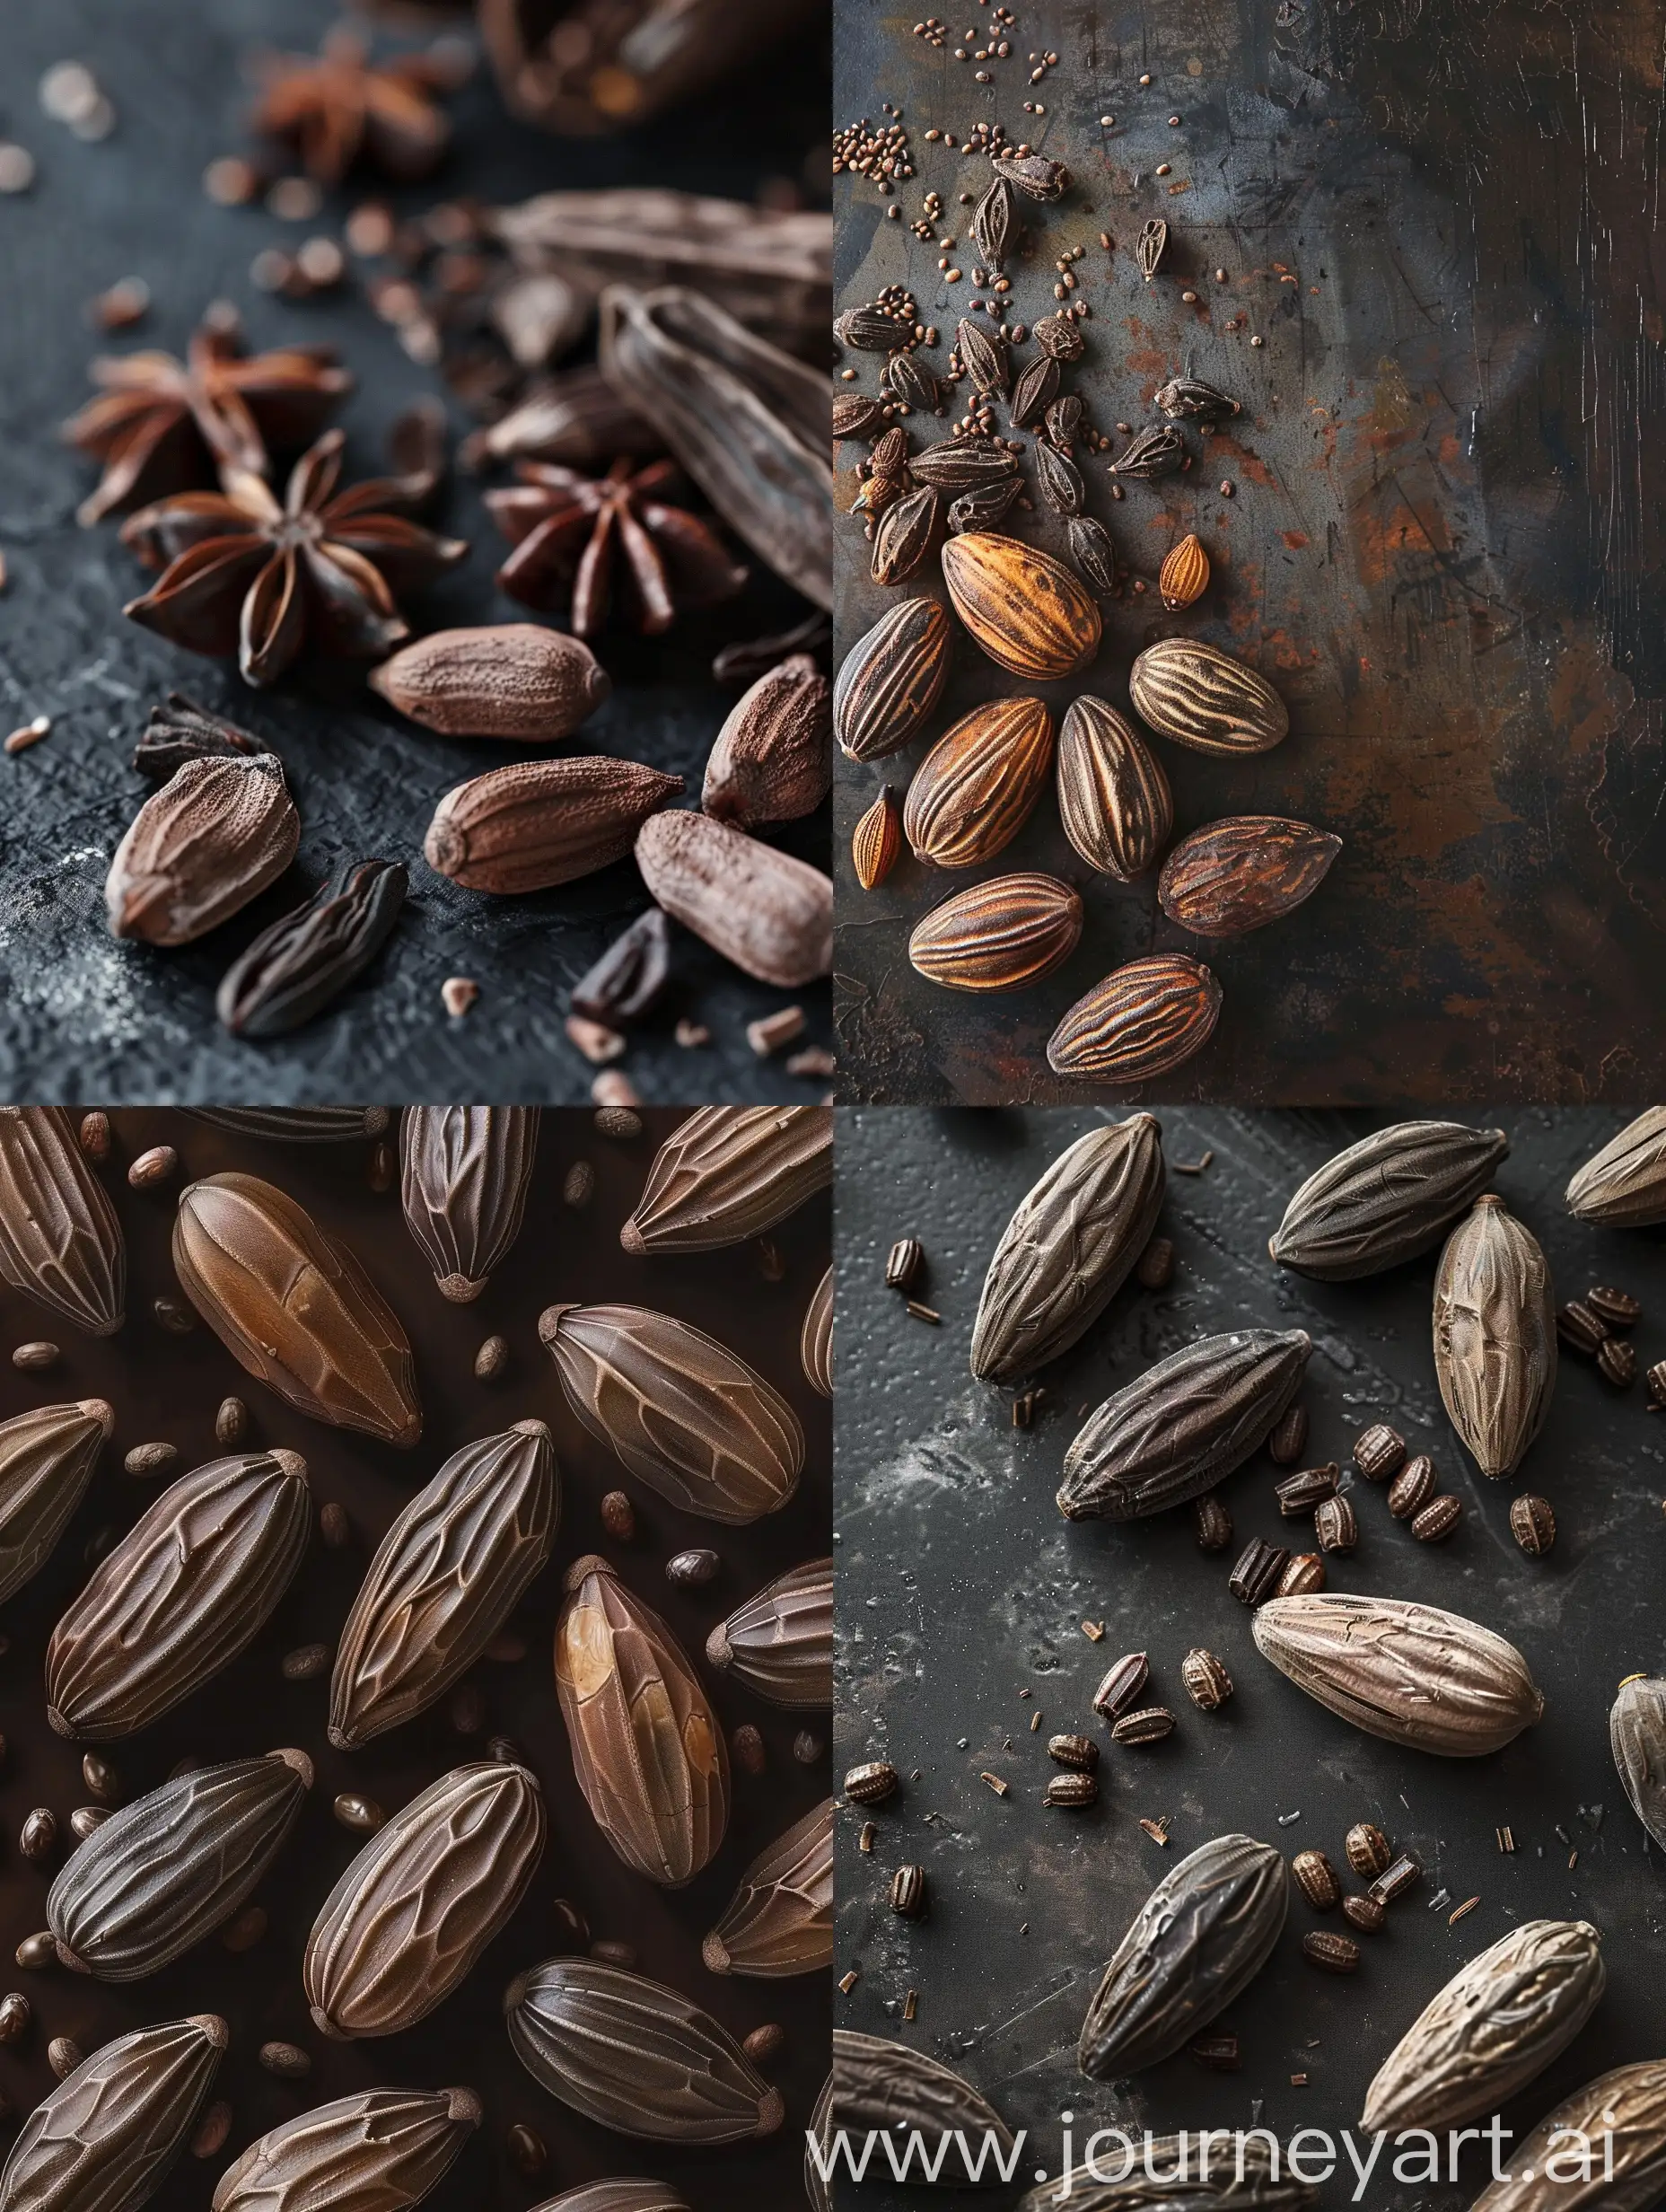 Tonka-Beans-Scattered-in-Photorealistic-CloseUp